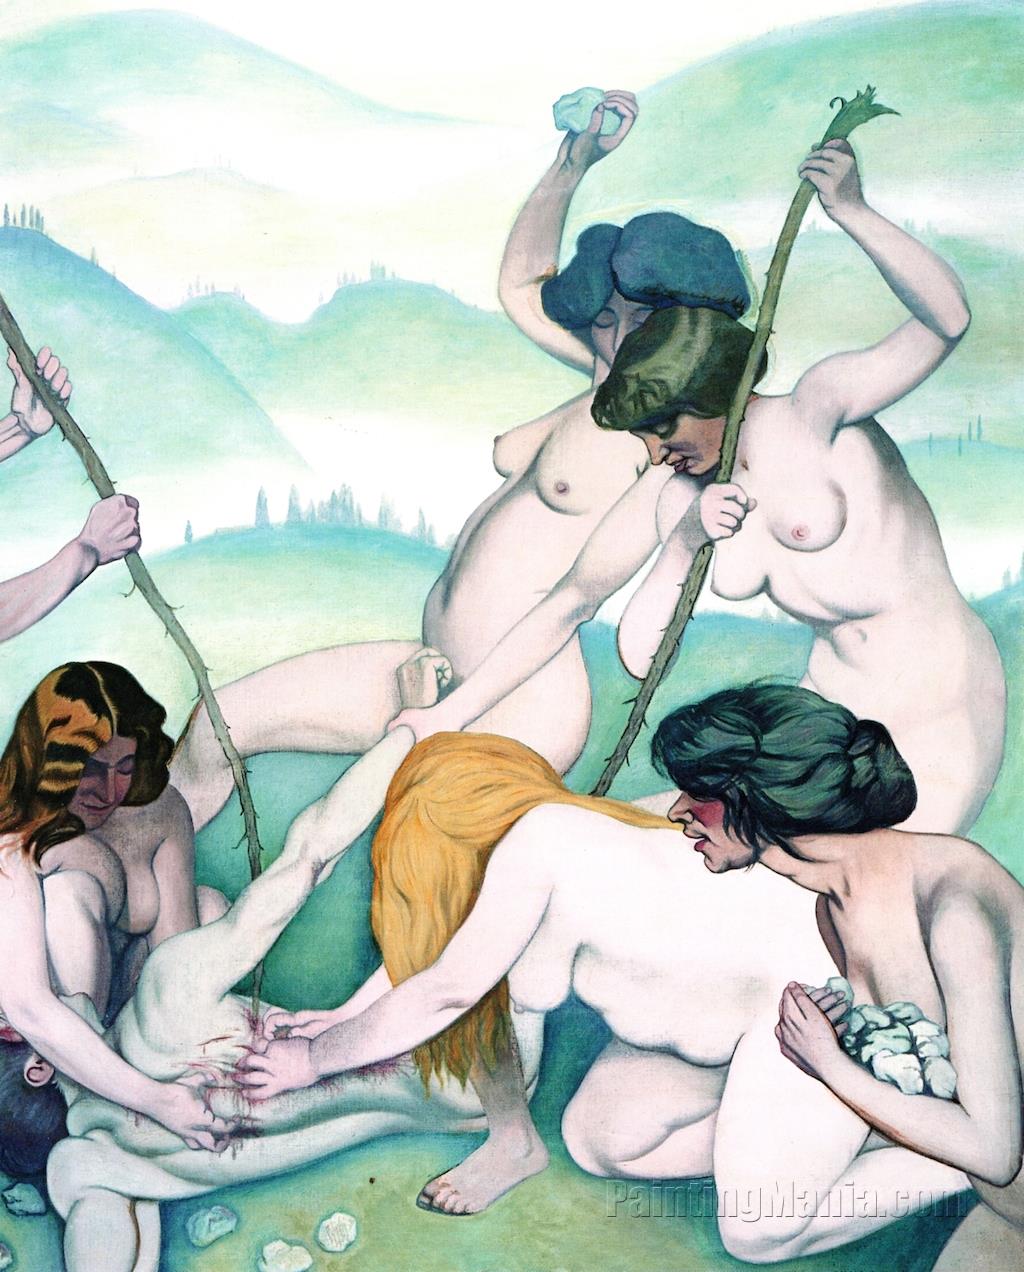 Slaying of Orpheus by the Maenads